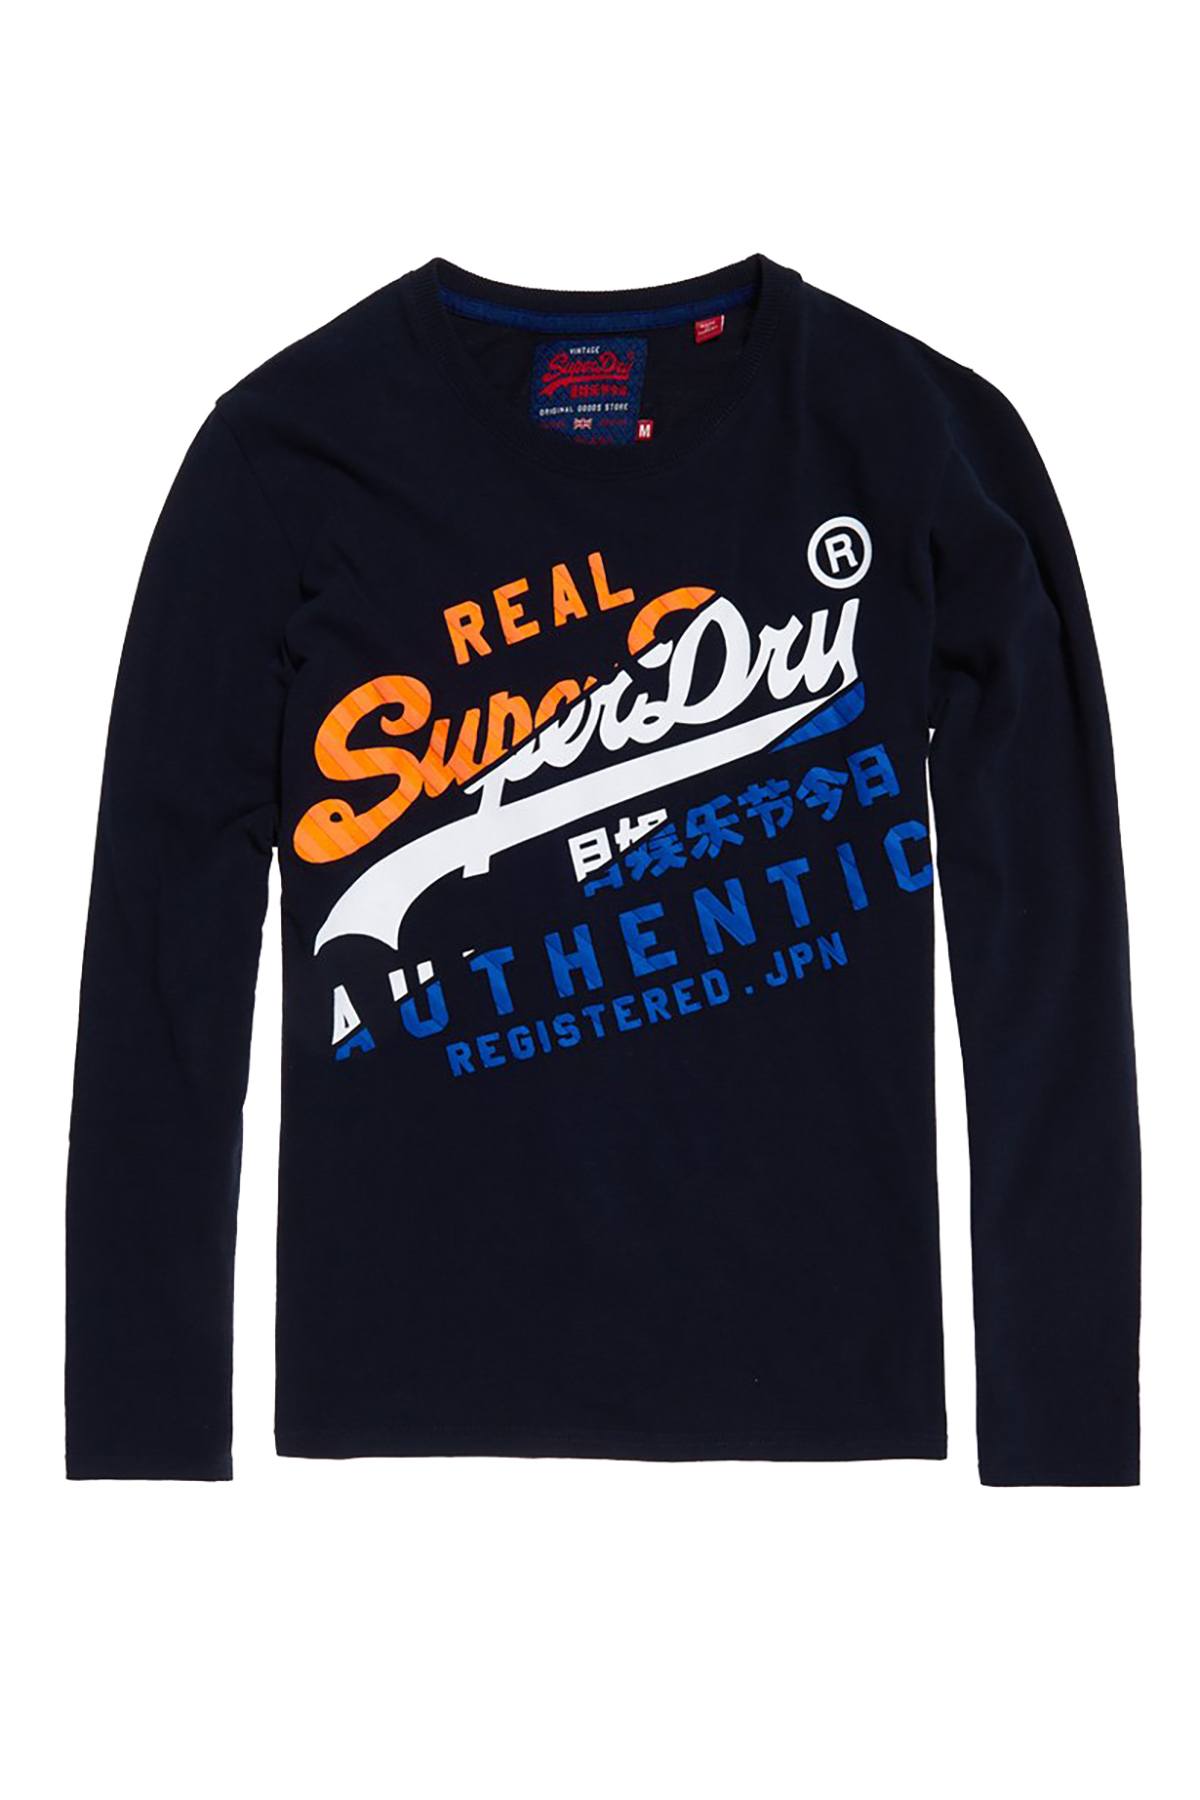 – Long-Sleeve XL Eclipse-Navy CheapUndies Vintage SuperDry Authentic T-Shirt